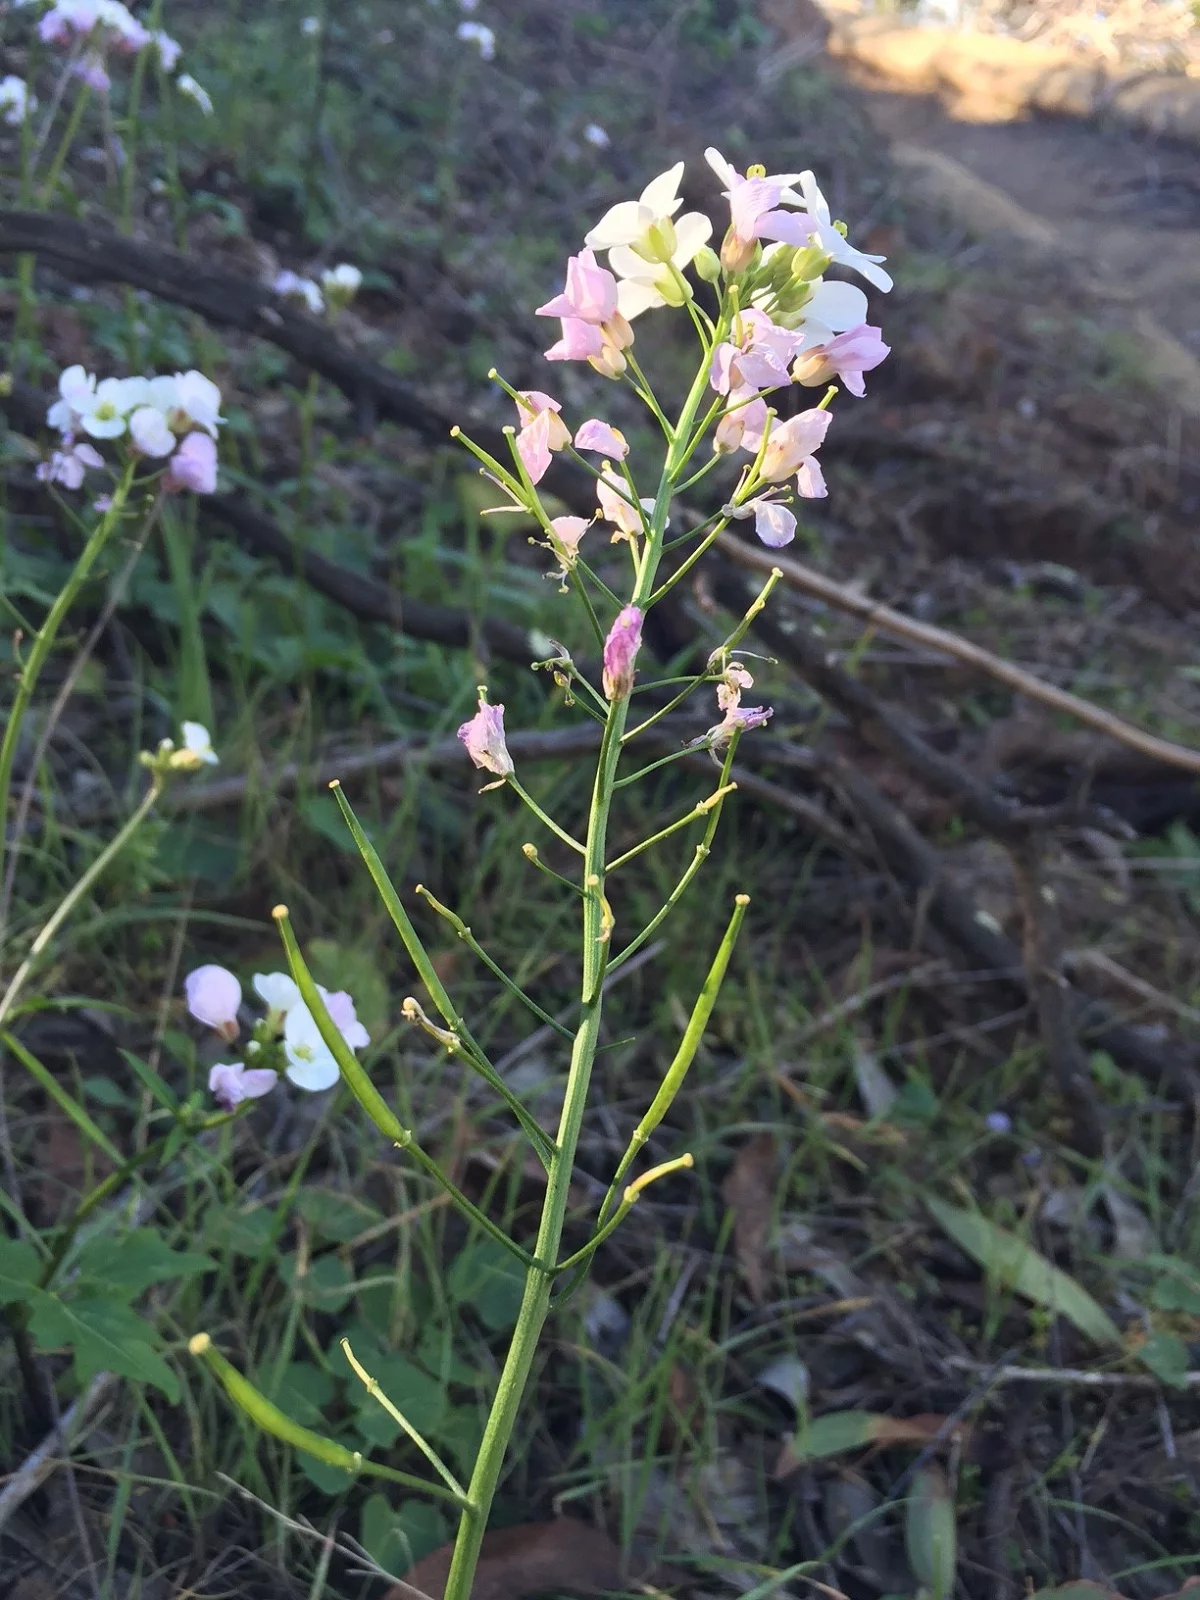 branch with bean pods sticking off and white/light pink flowers on top